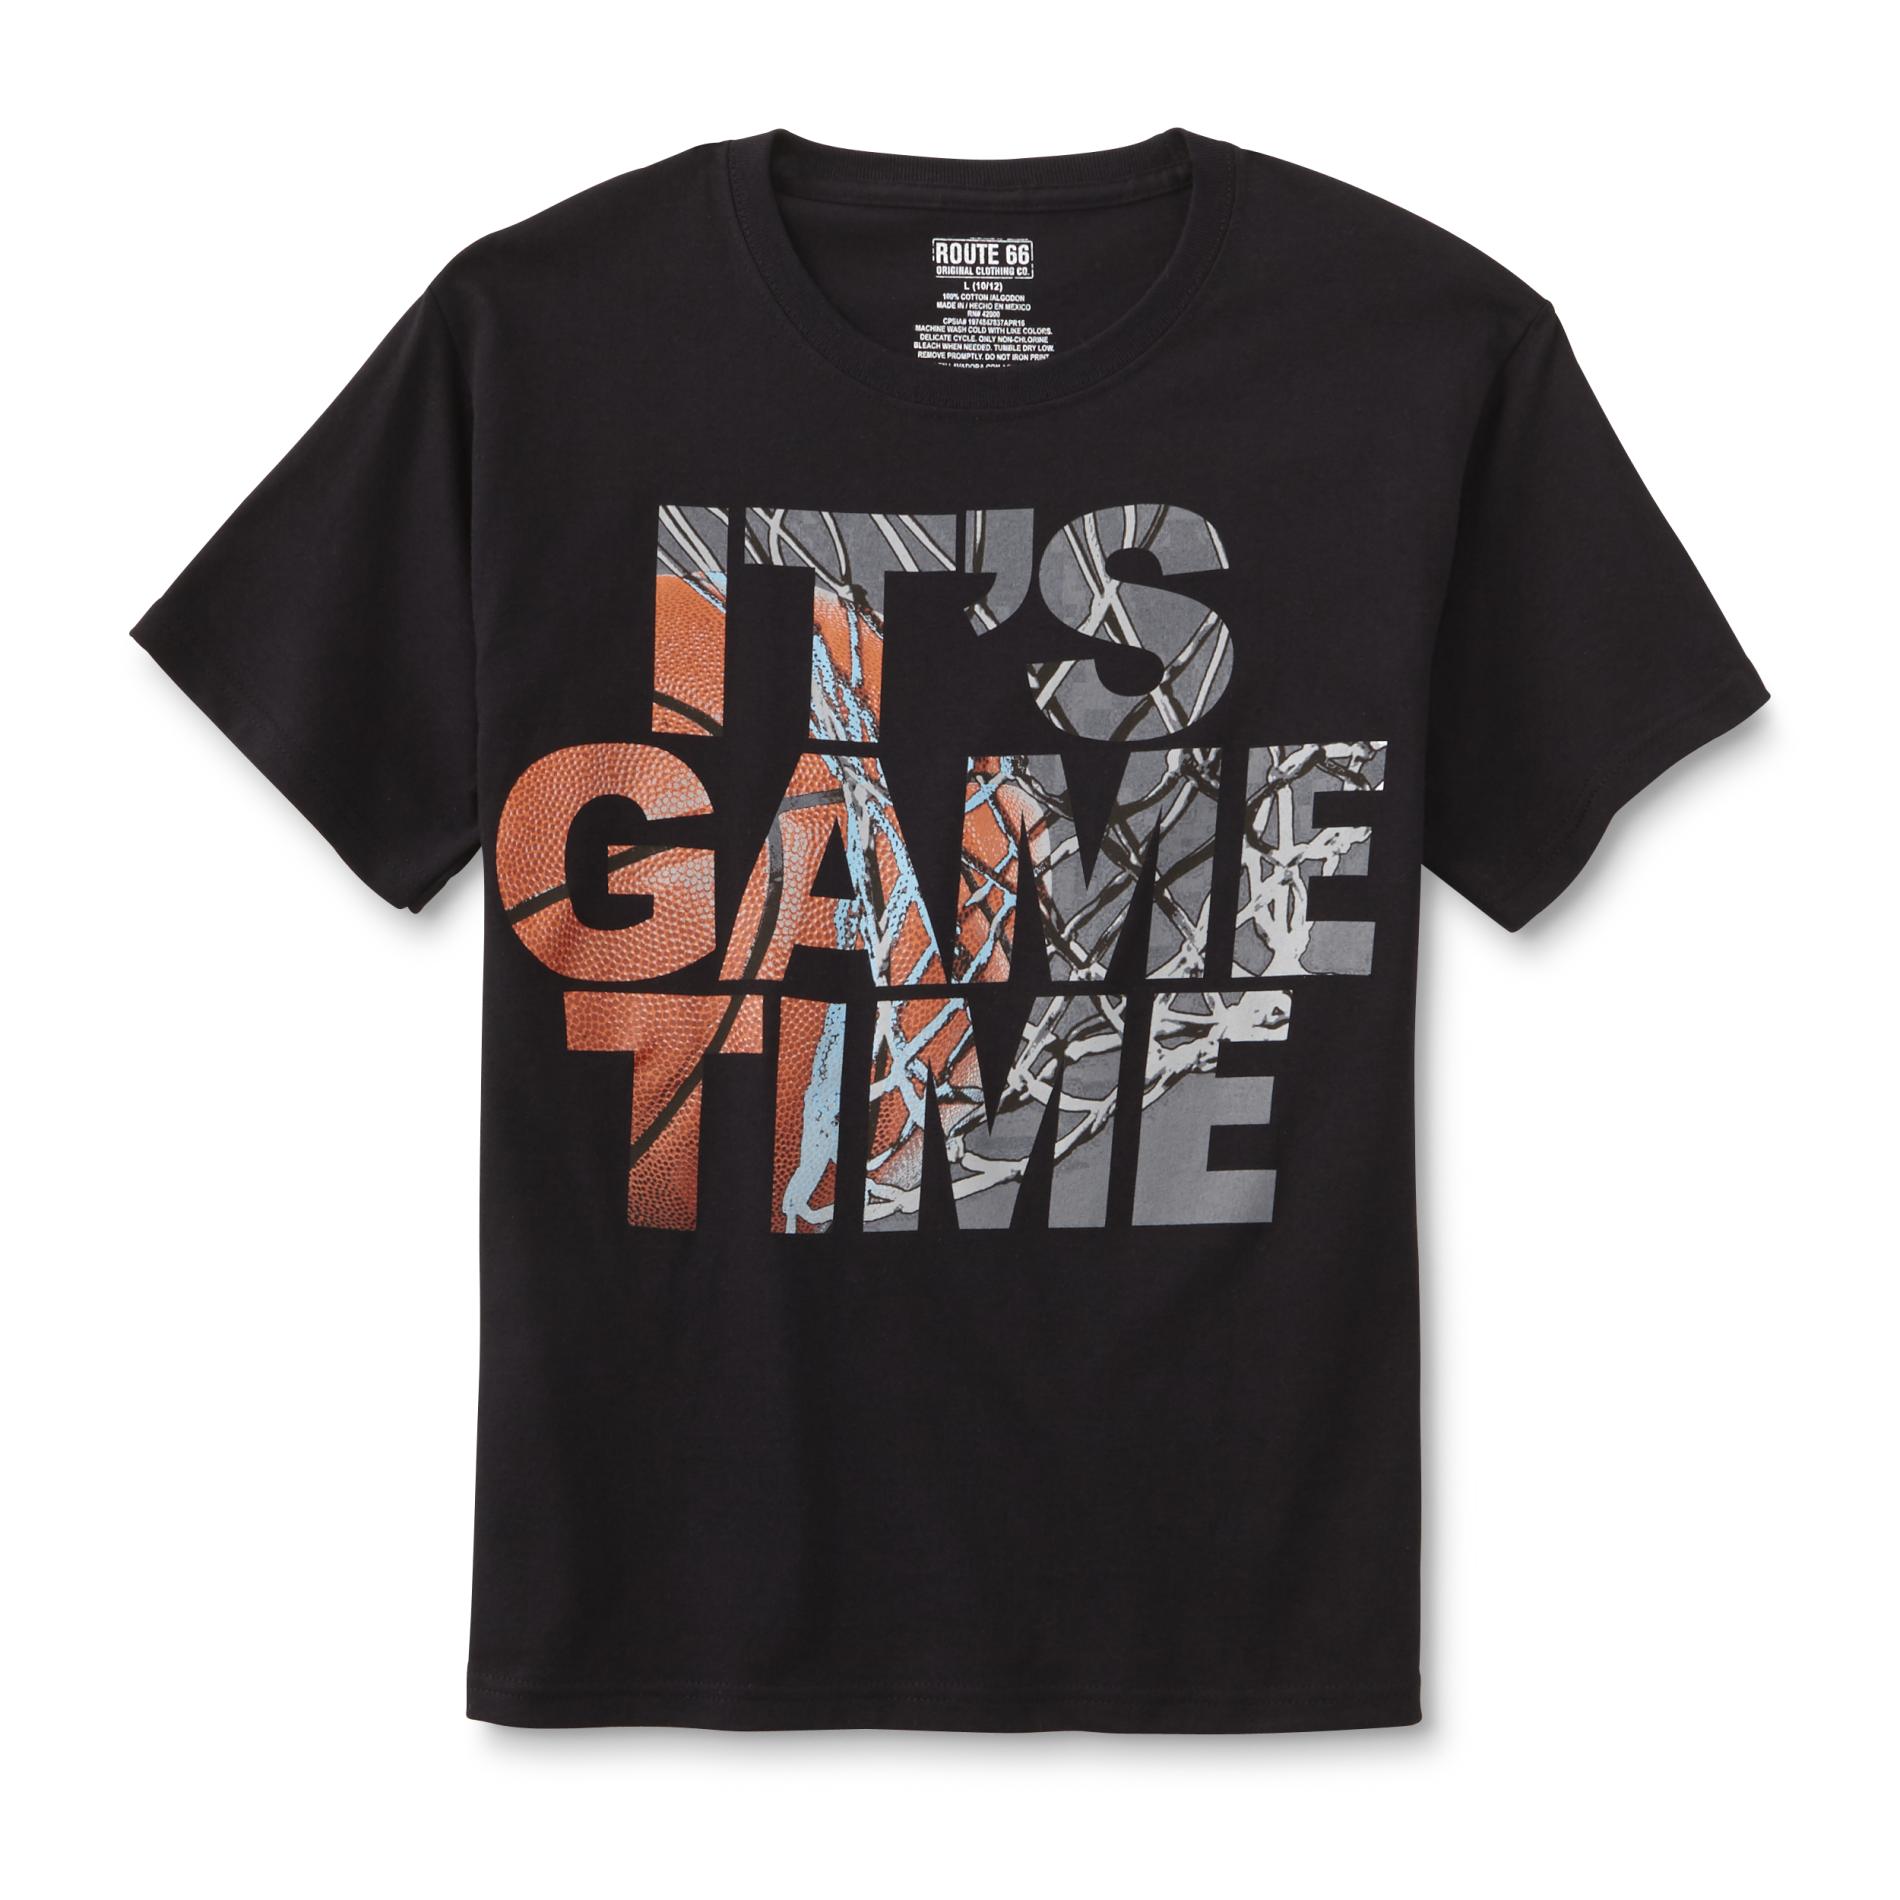 Route 66 Boy's Graphic T-Shirt - It's Game Time